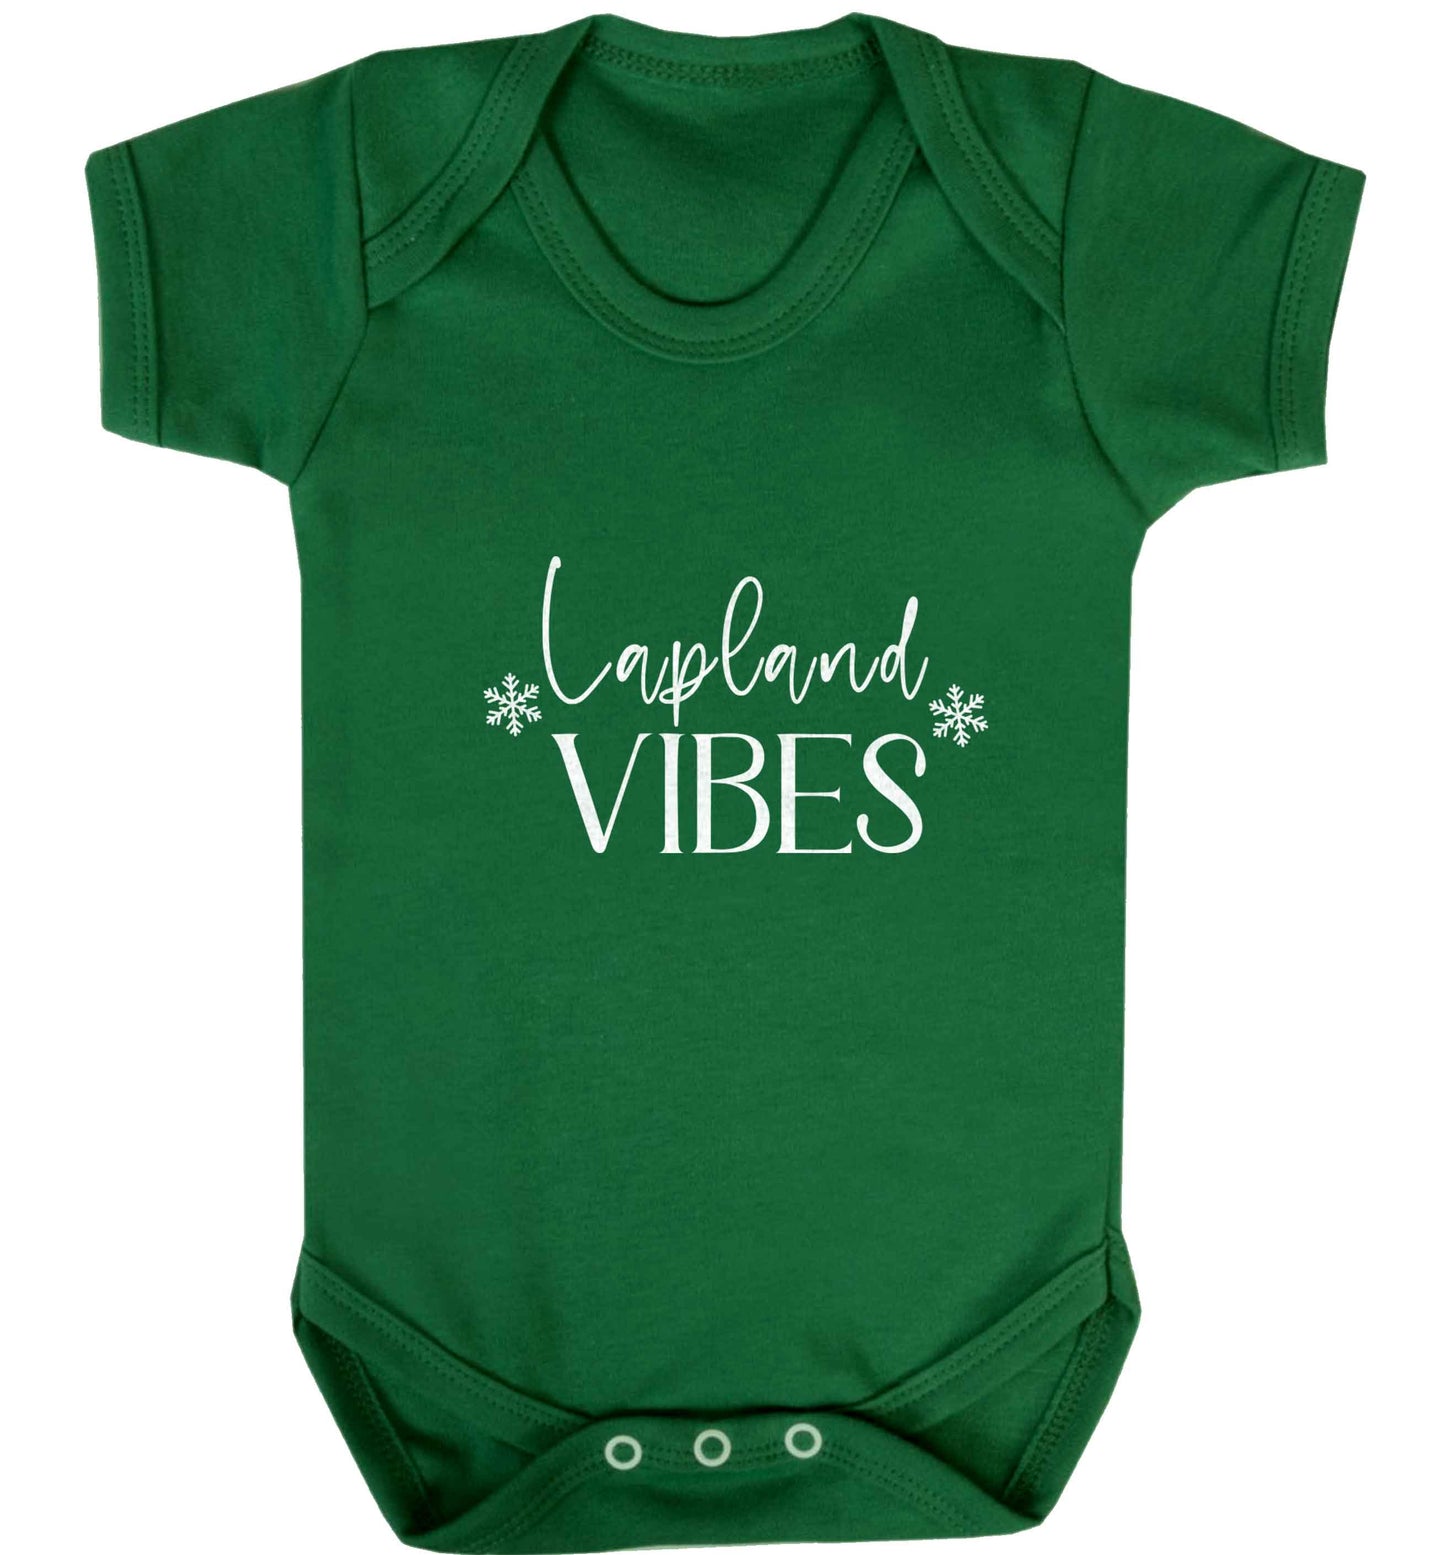 Lapland vibes baby vest green 18-24 months